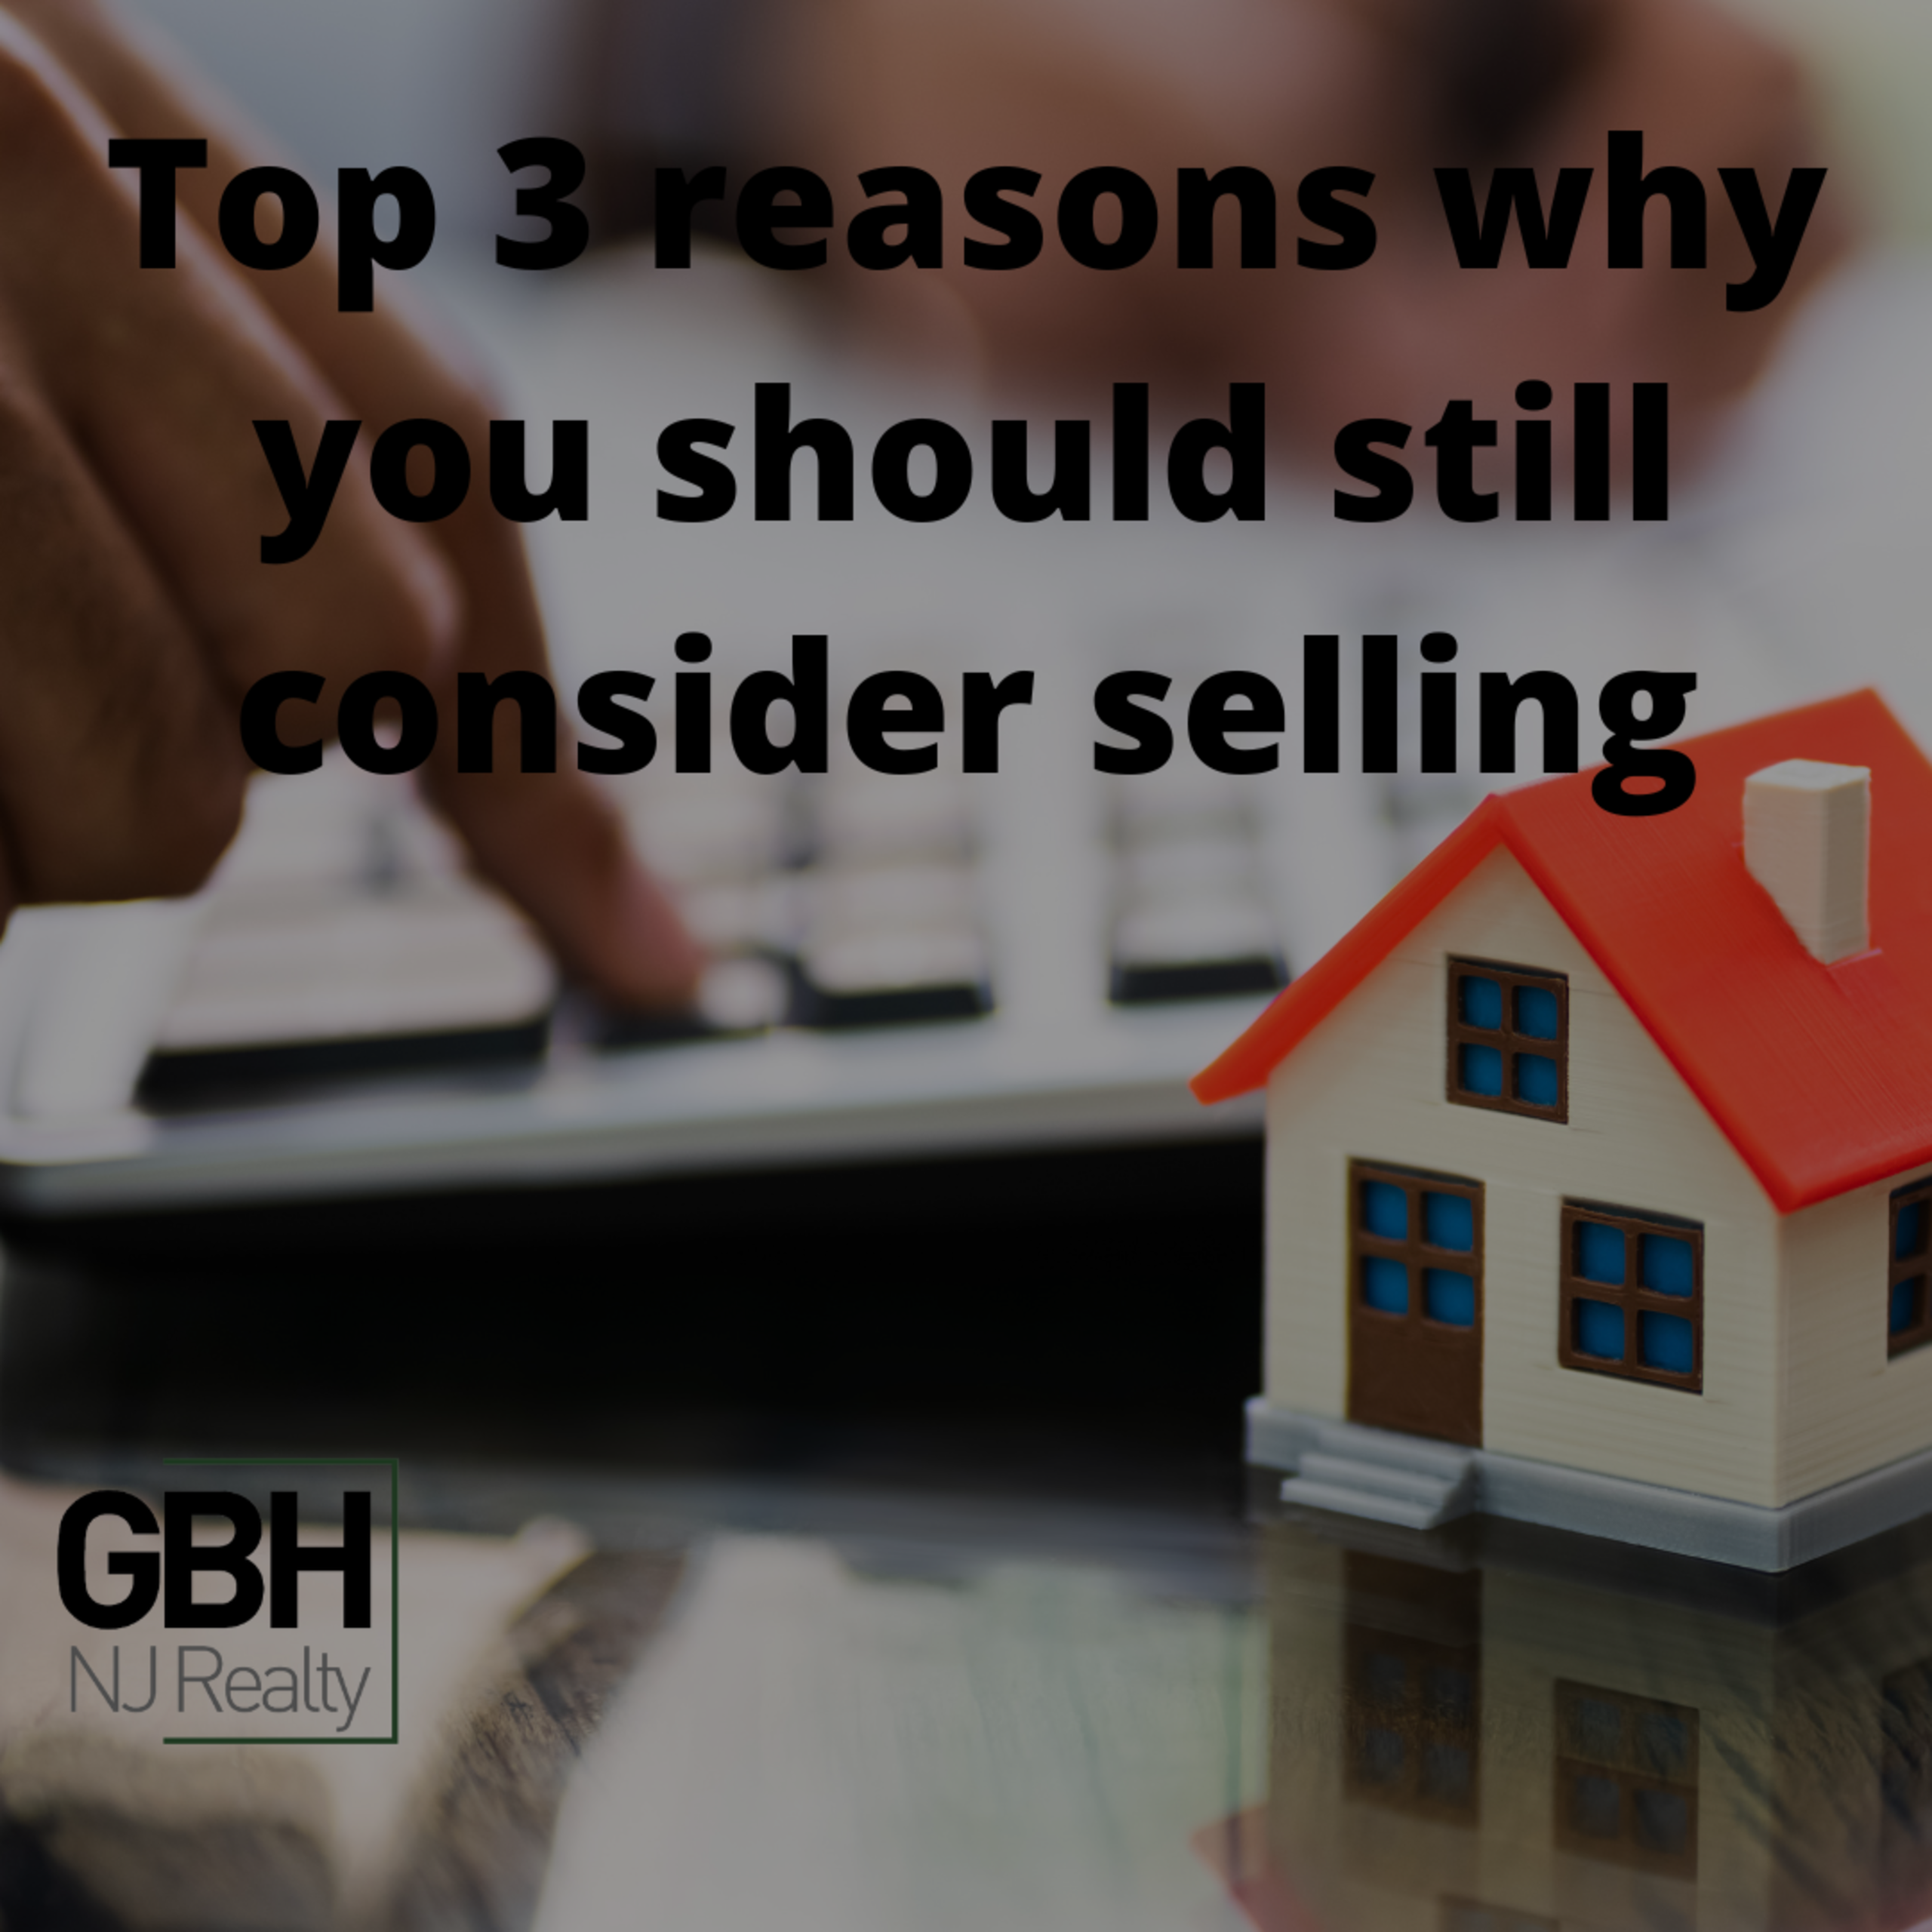 Top 3 reasons to sell in todays real estate market